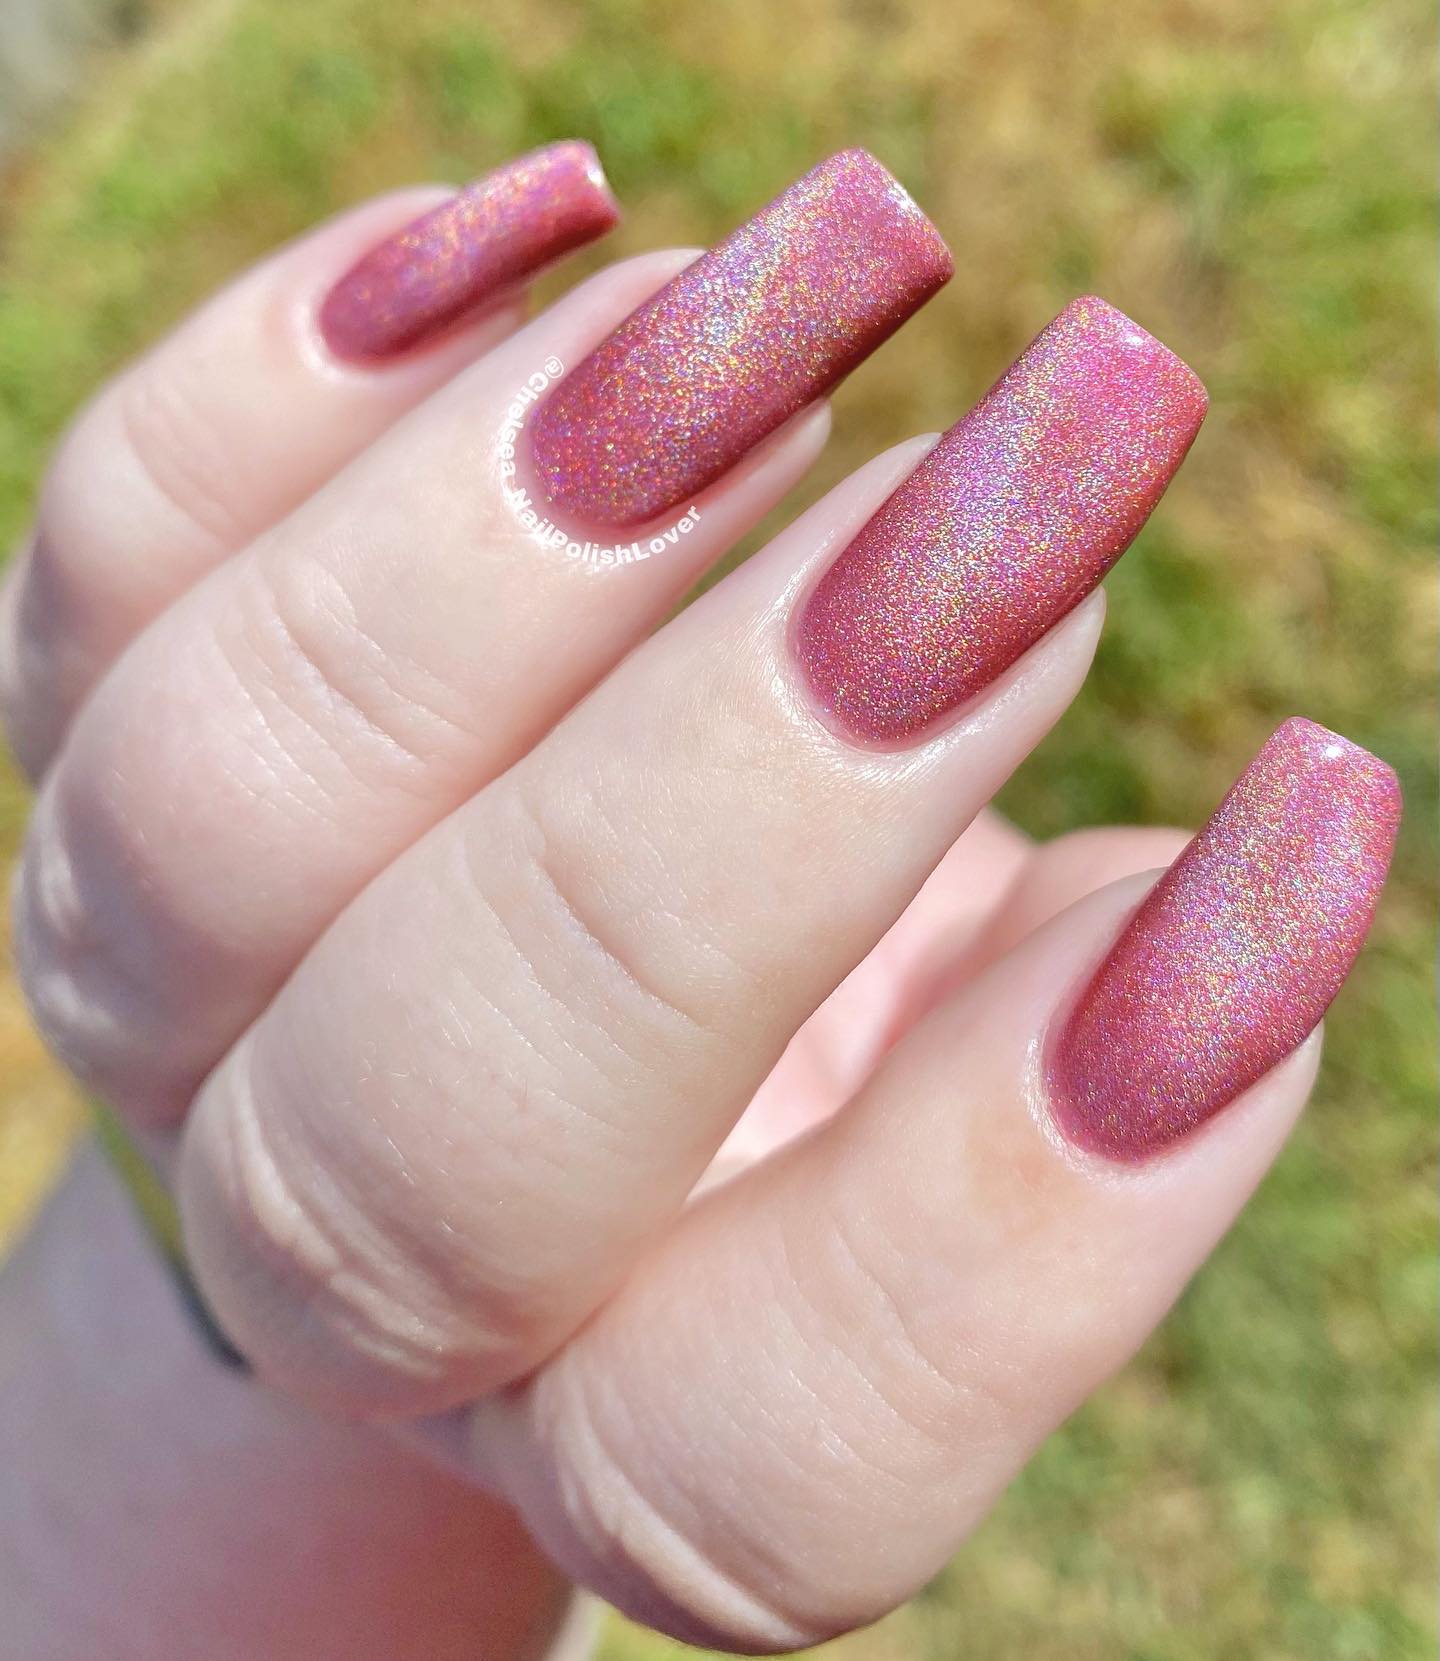 Shimmery nails are for women or girls who enjoy flirtily and party ideas. Does this sound like you?